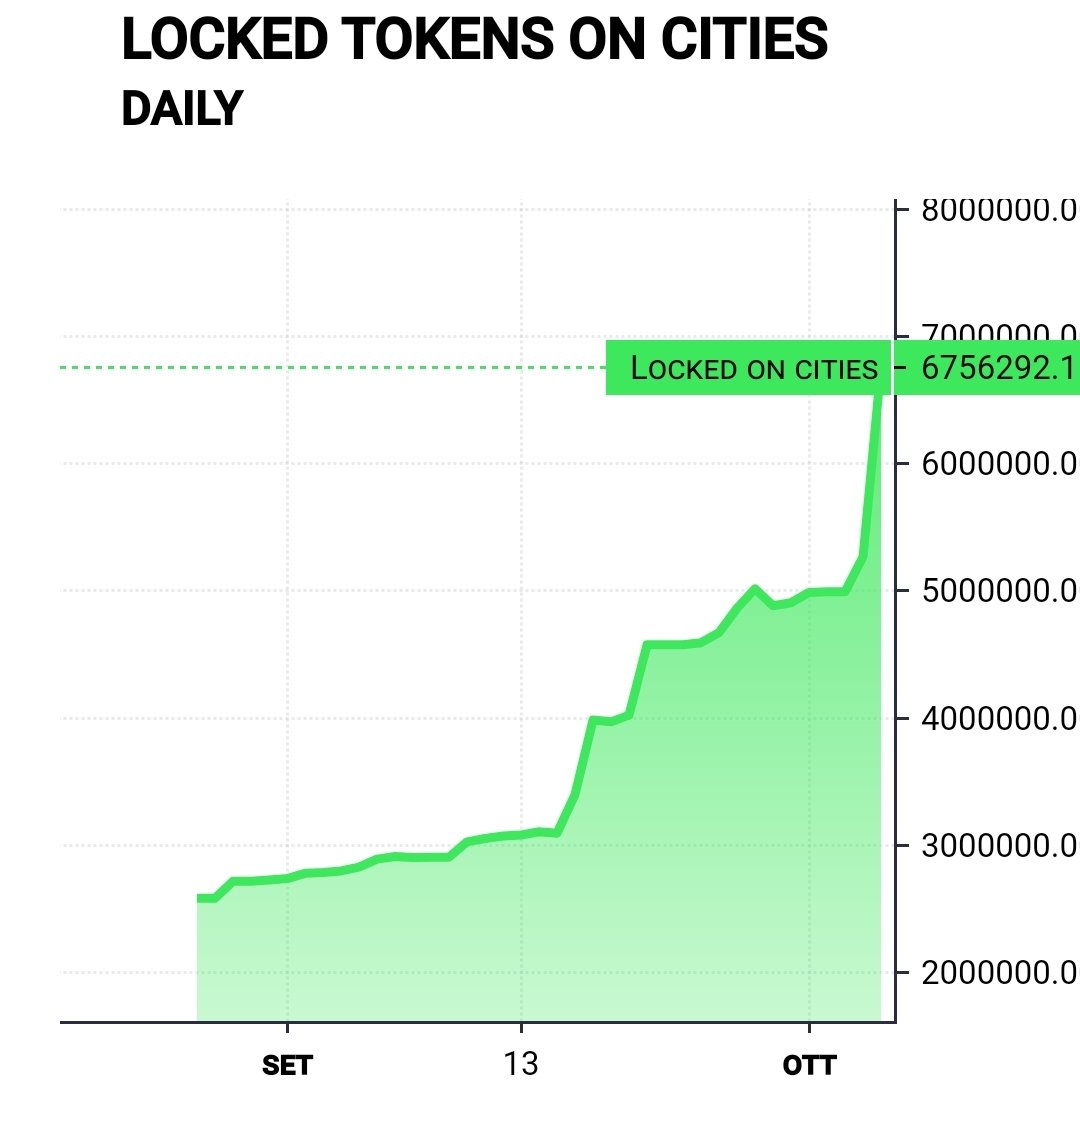 6,75M $FTB locked in the cities and this number is increasing day by day 🔥 new players are coming every day, what are you waiting for?  Build your empire on @NFTBBuilders 🔥

#businessbuilders #Meter #Meterians #P2E #Metaverse #NFTs #NFTGaming #voltswap #quickswap #Polygon $MTRG